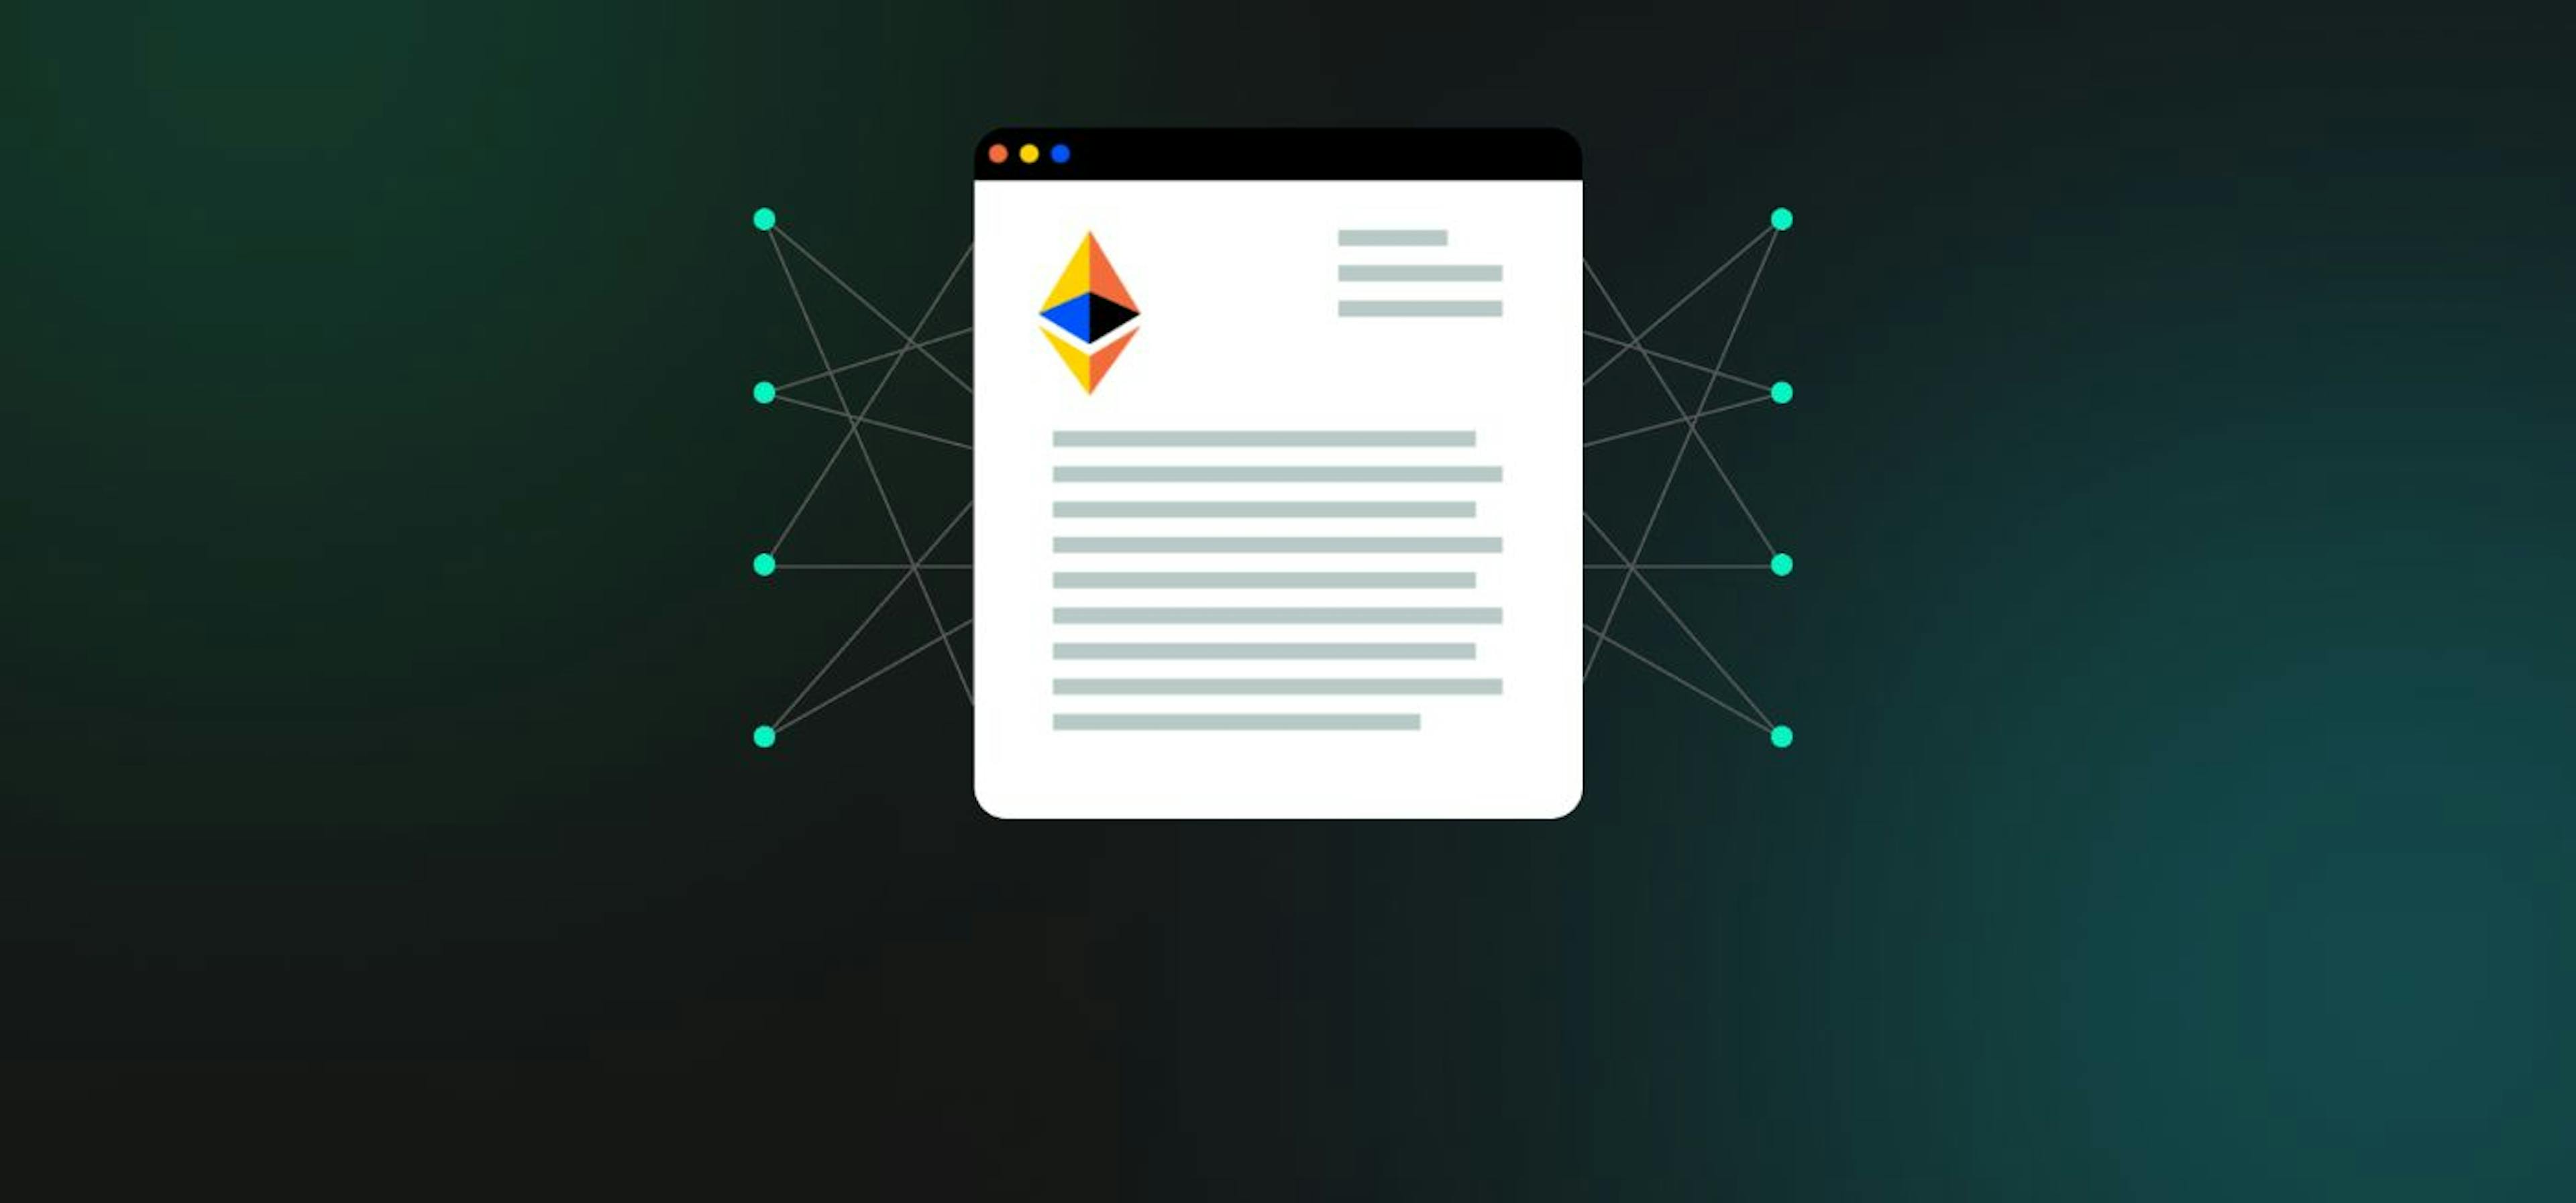 Ethereum — a network with smart contracts support